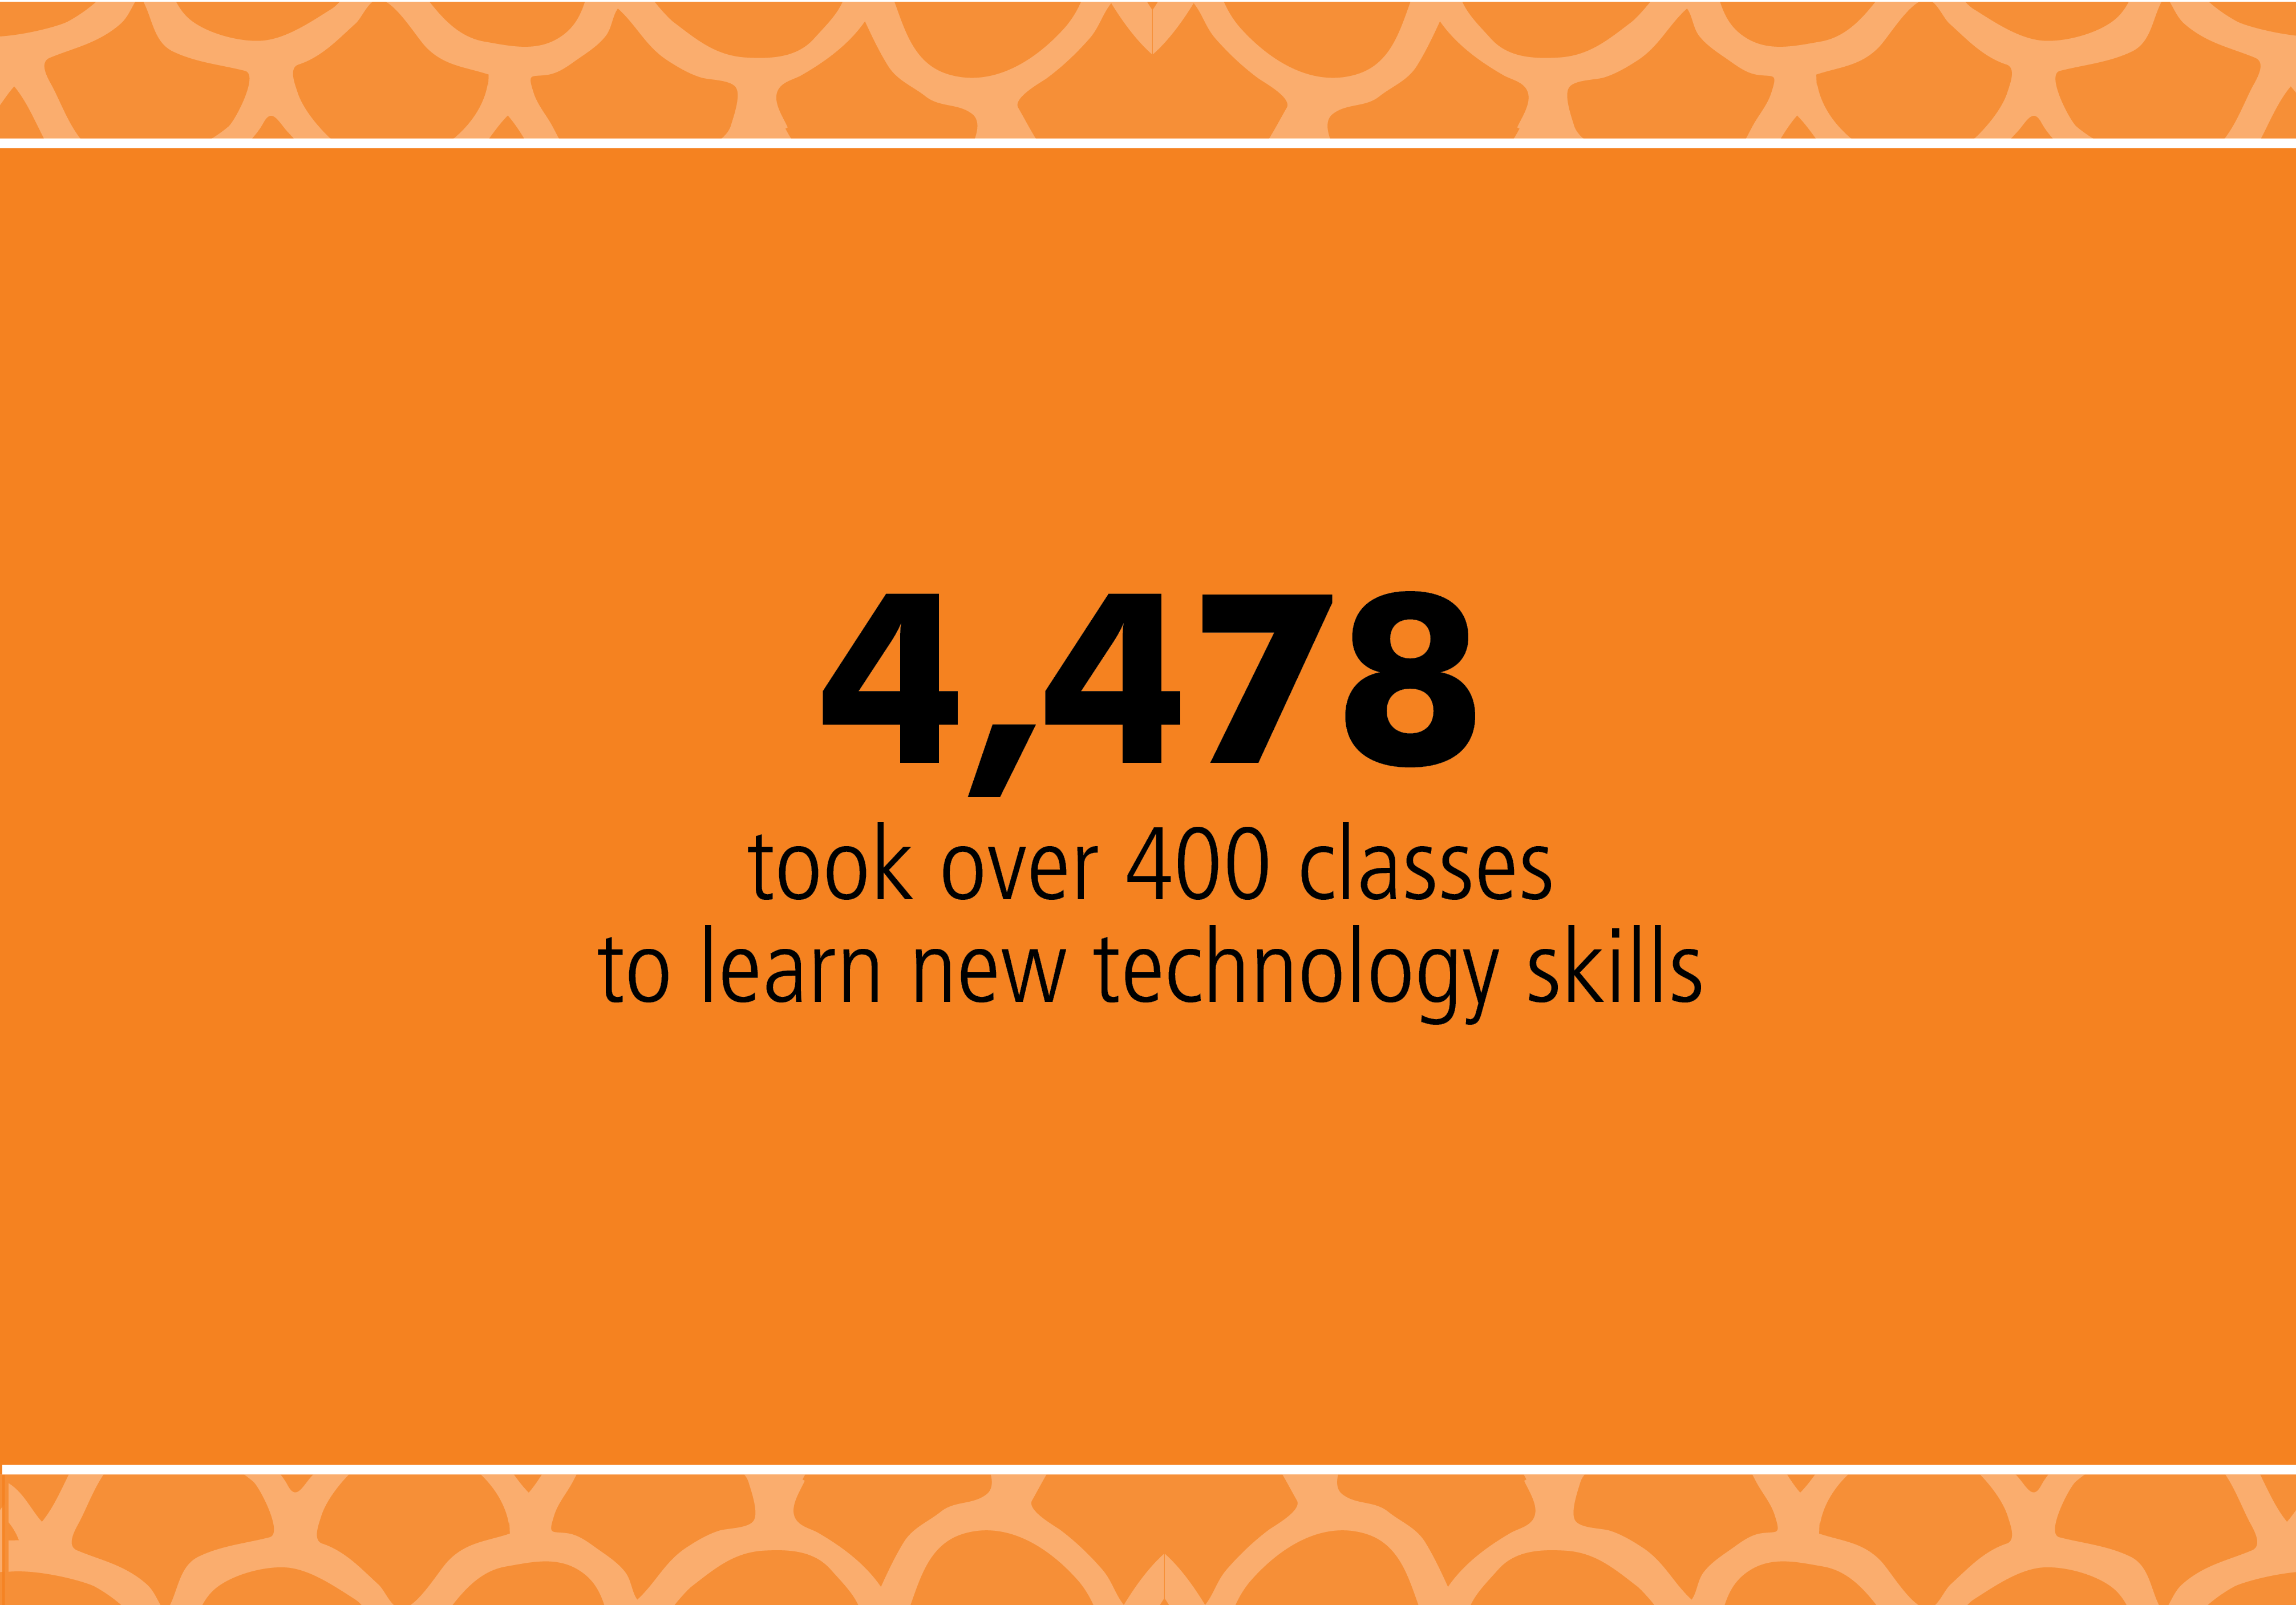 4,478 took over 400 classes to learn new technology skills